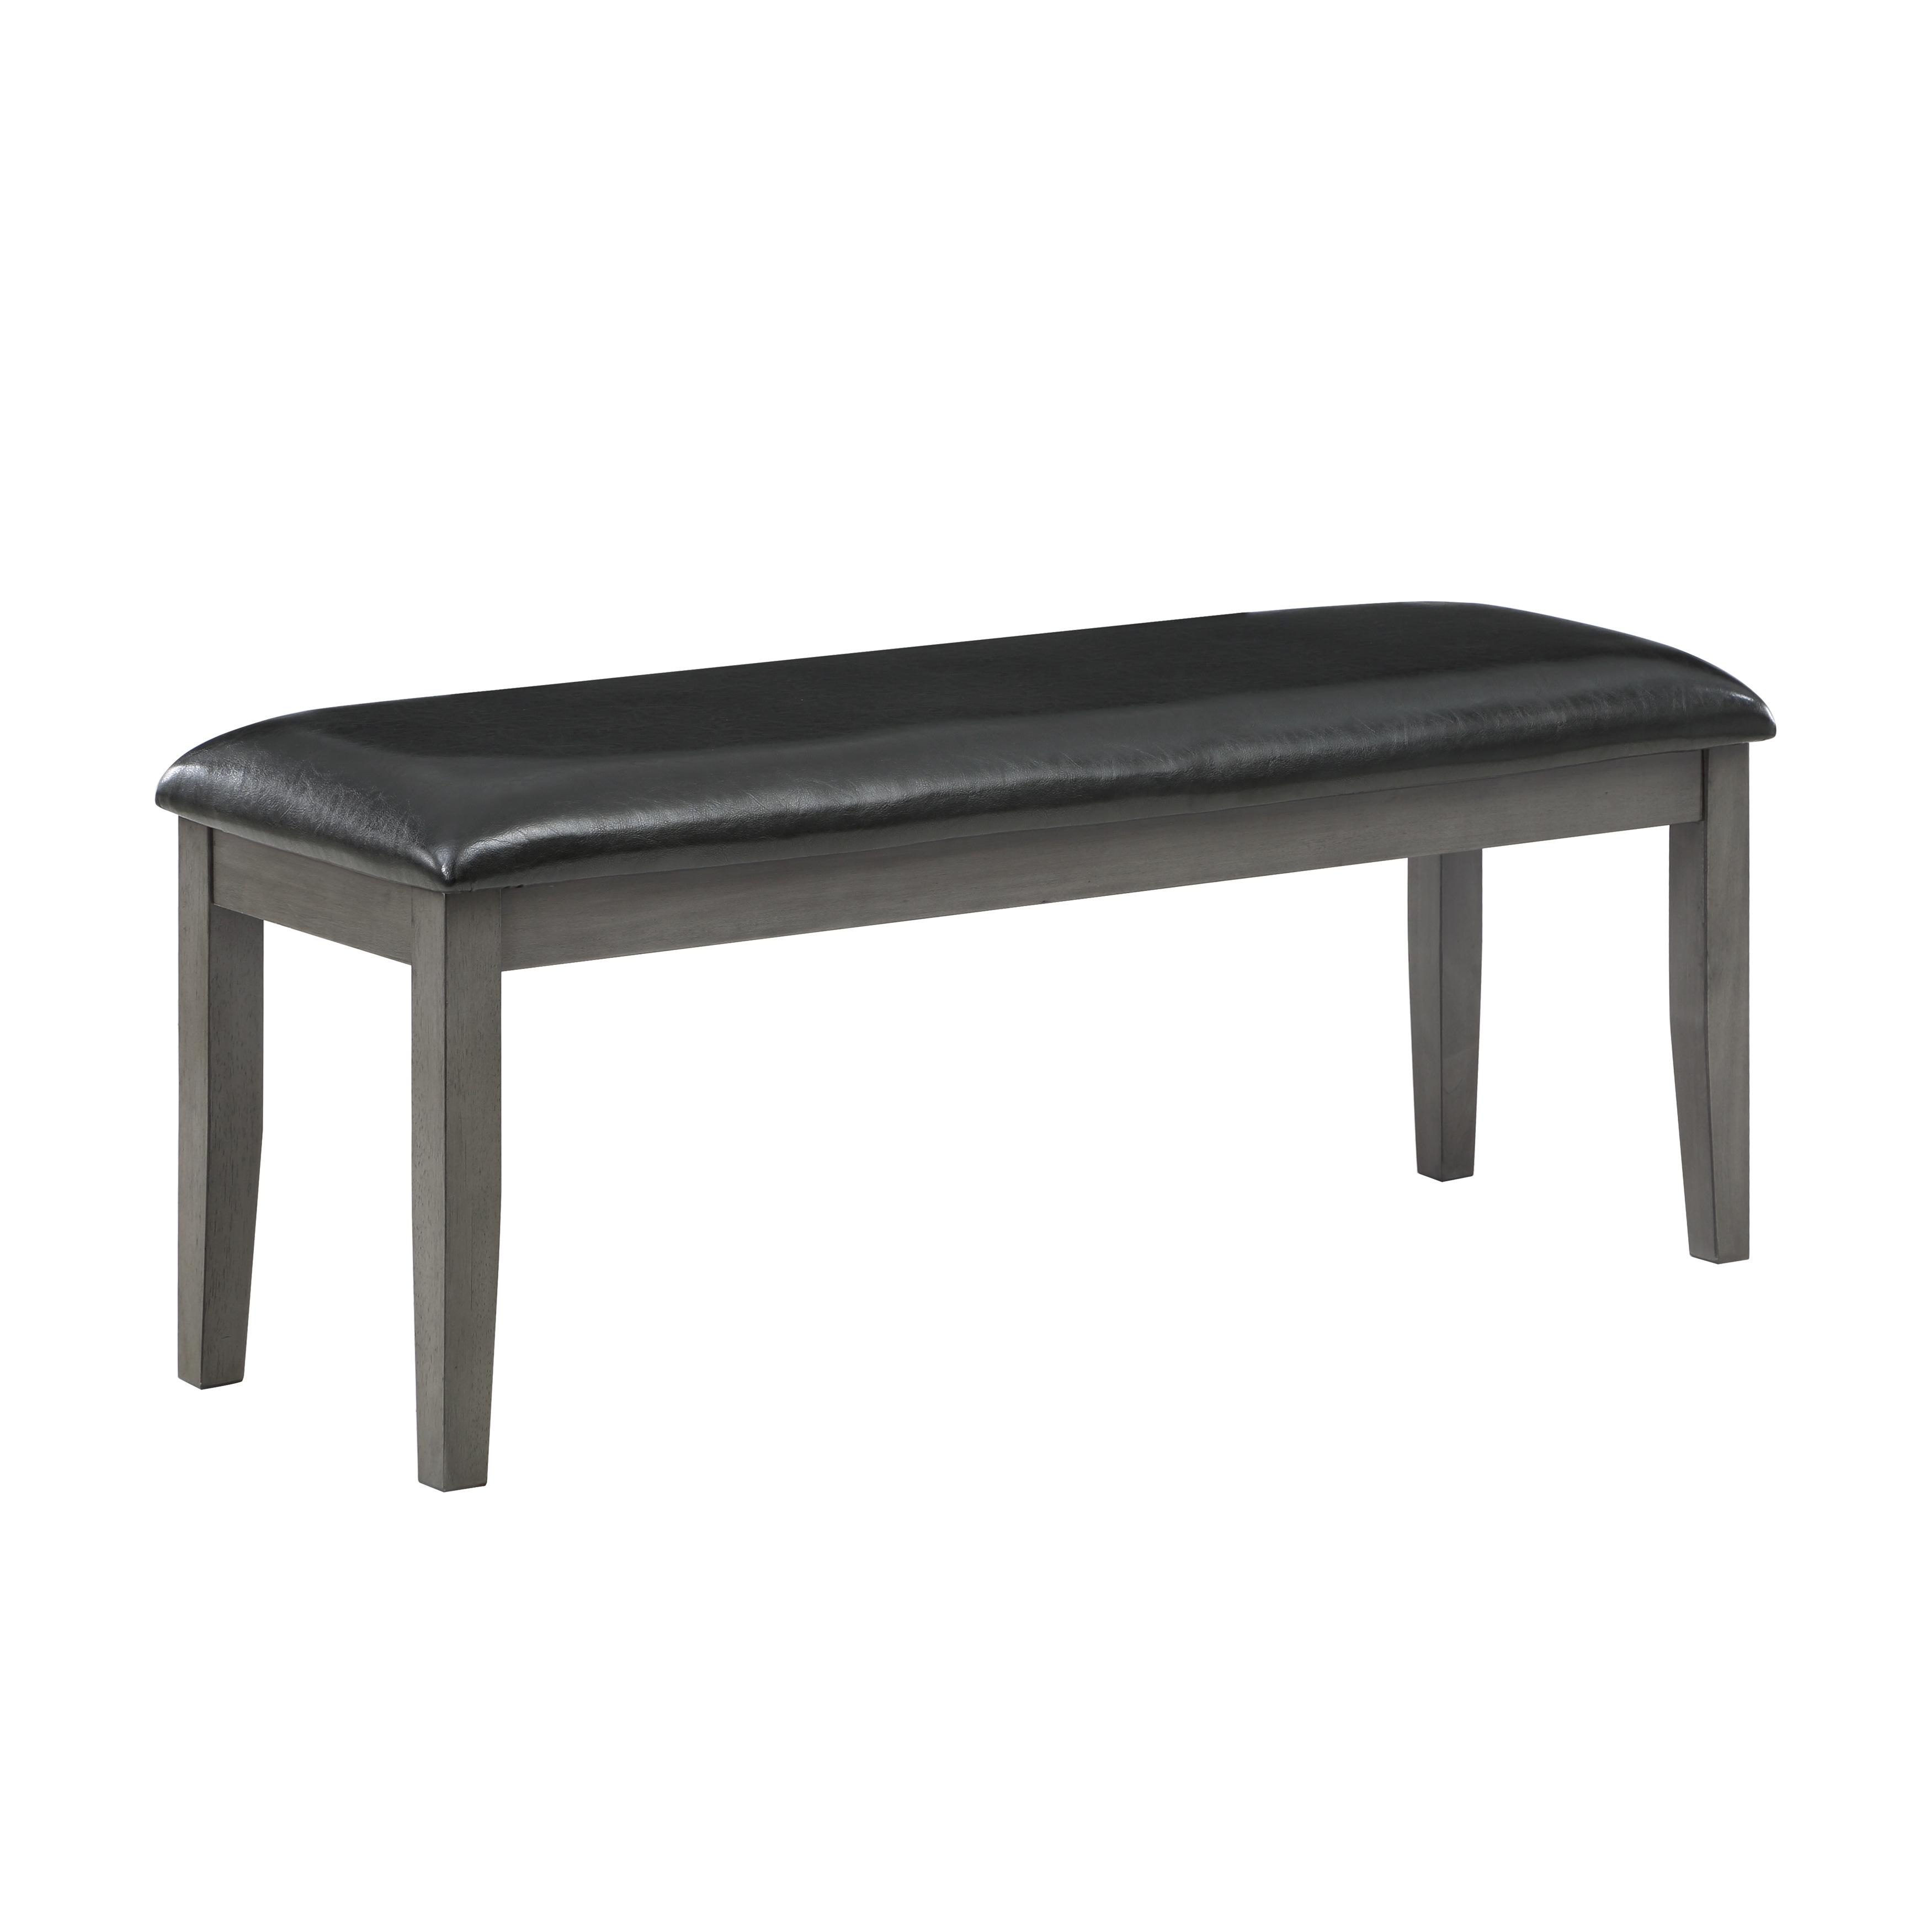 Transitional Dining Bench 5567GY-13 Nashua 5567GY-13 in Gray Faux Leather